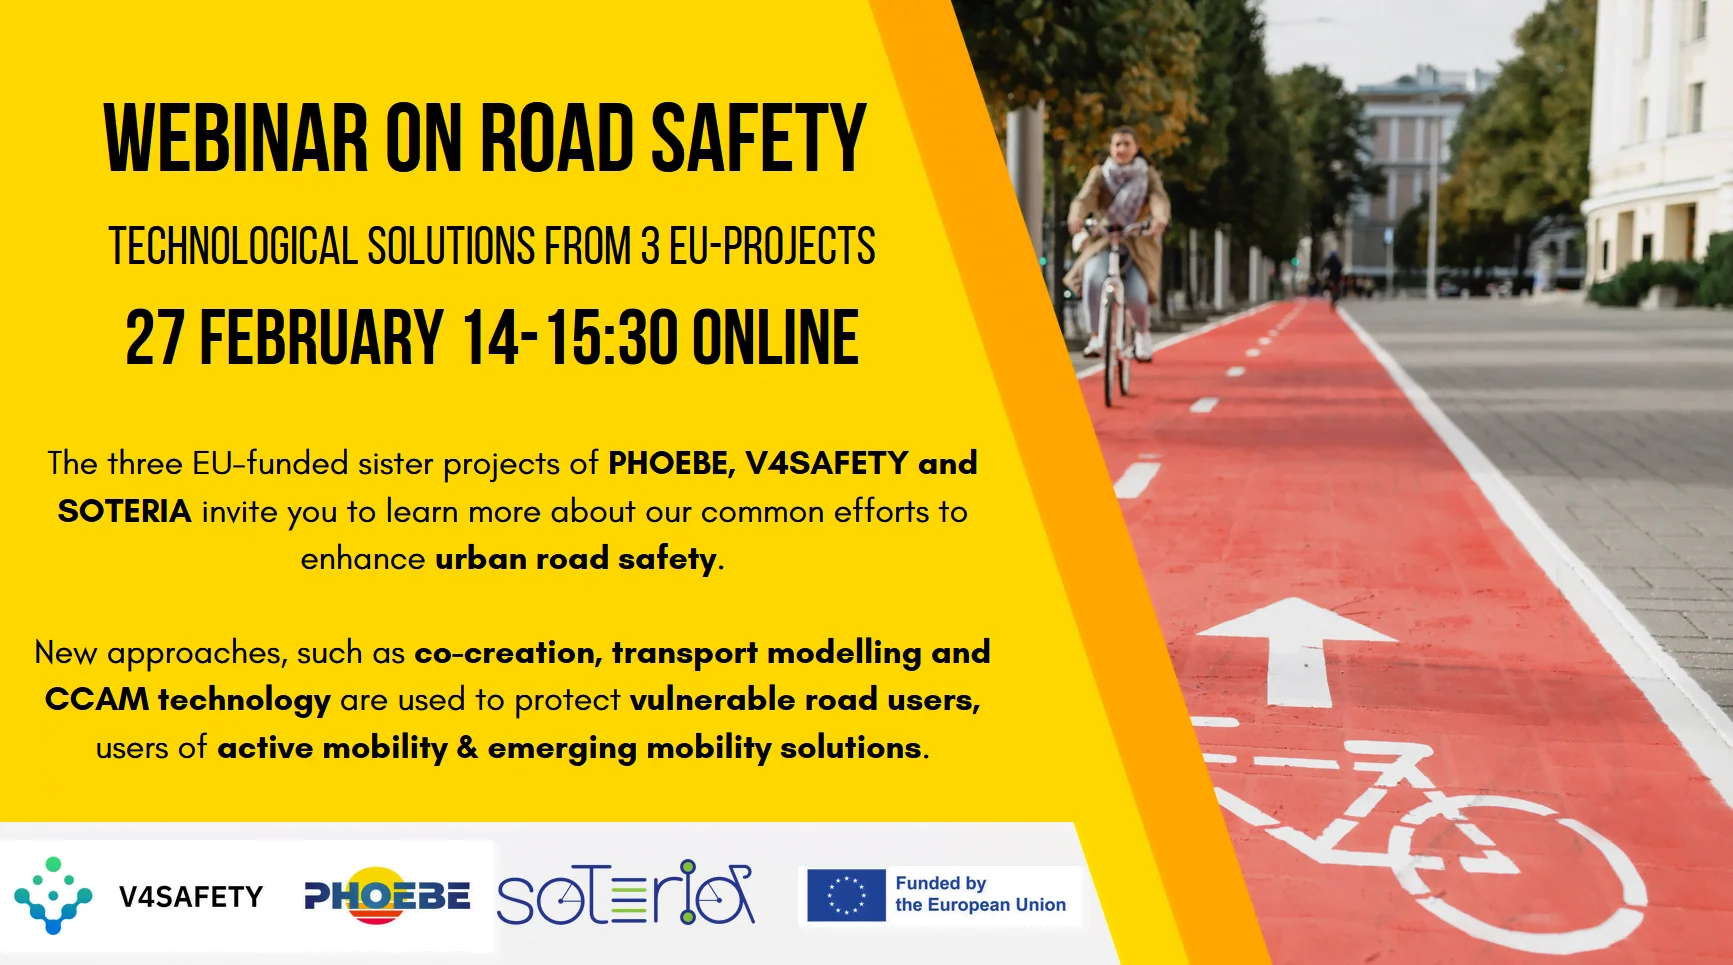 Road safety webinar marks start of cooperation between PHOEBE sister projects